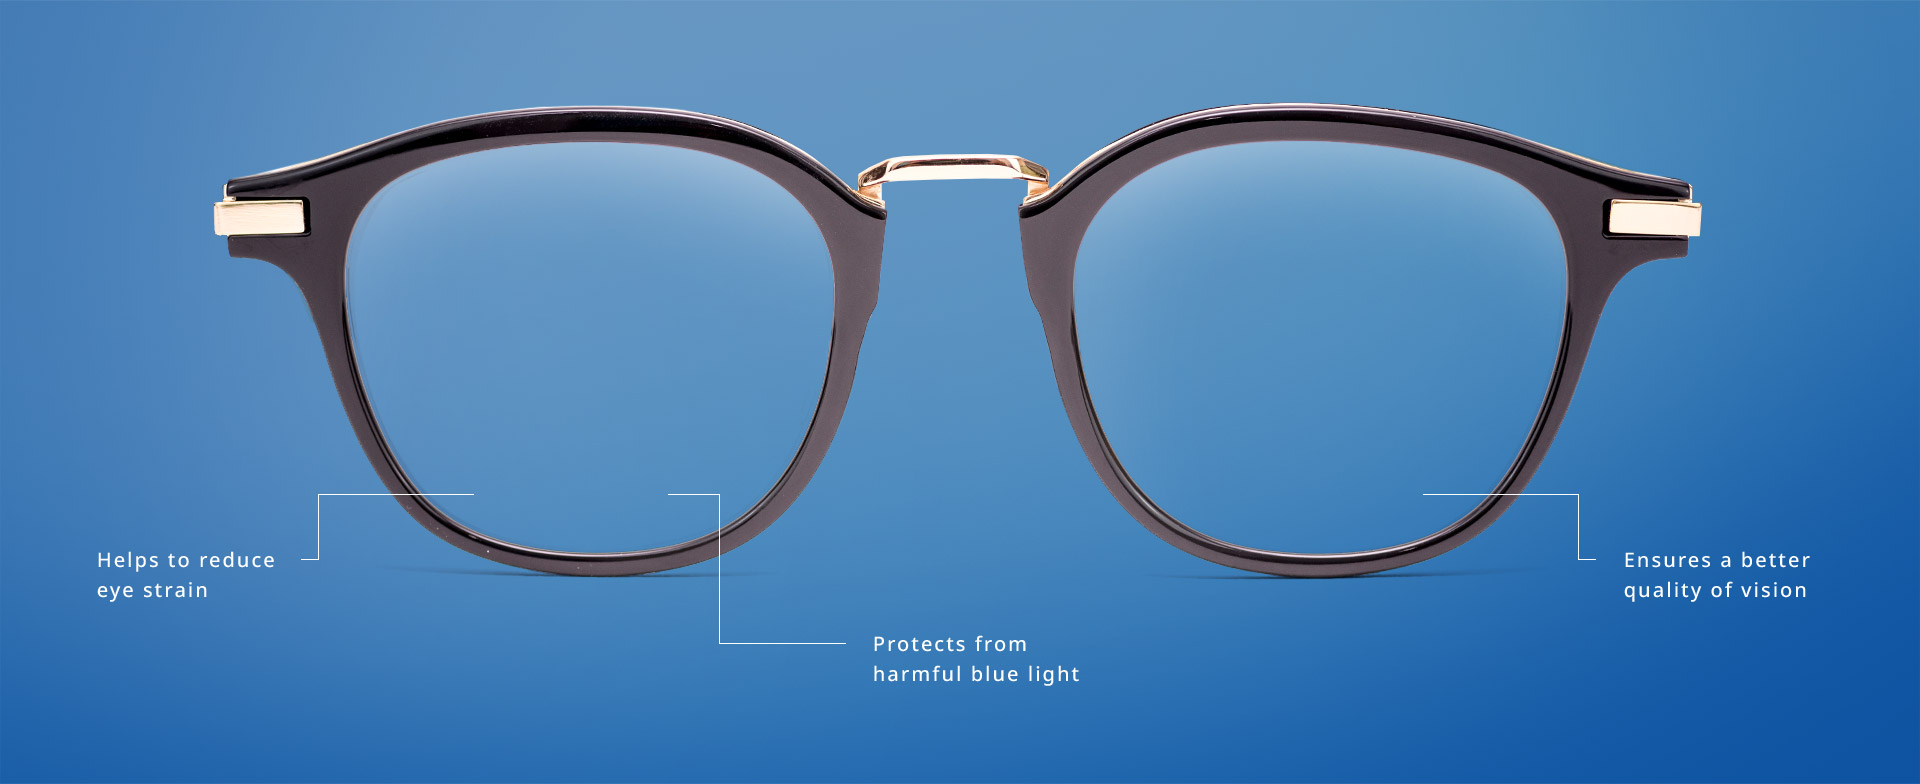 1. Helps to reduce eye strain  2. Protects frm harmful blue light 3. Ensures a better quality of vision 